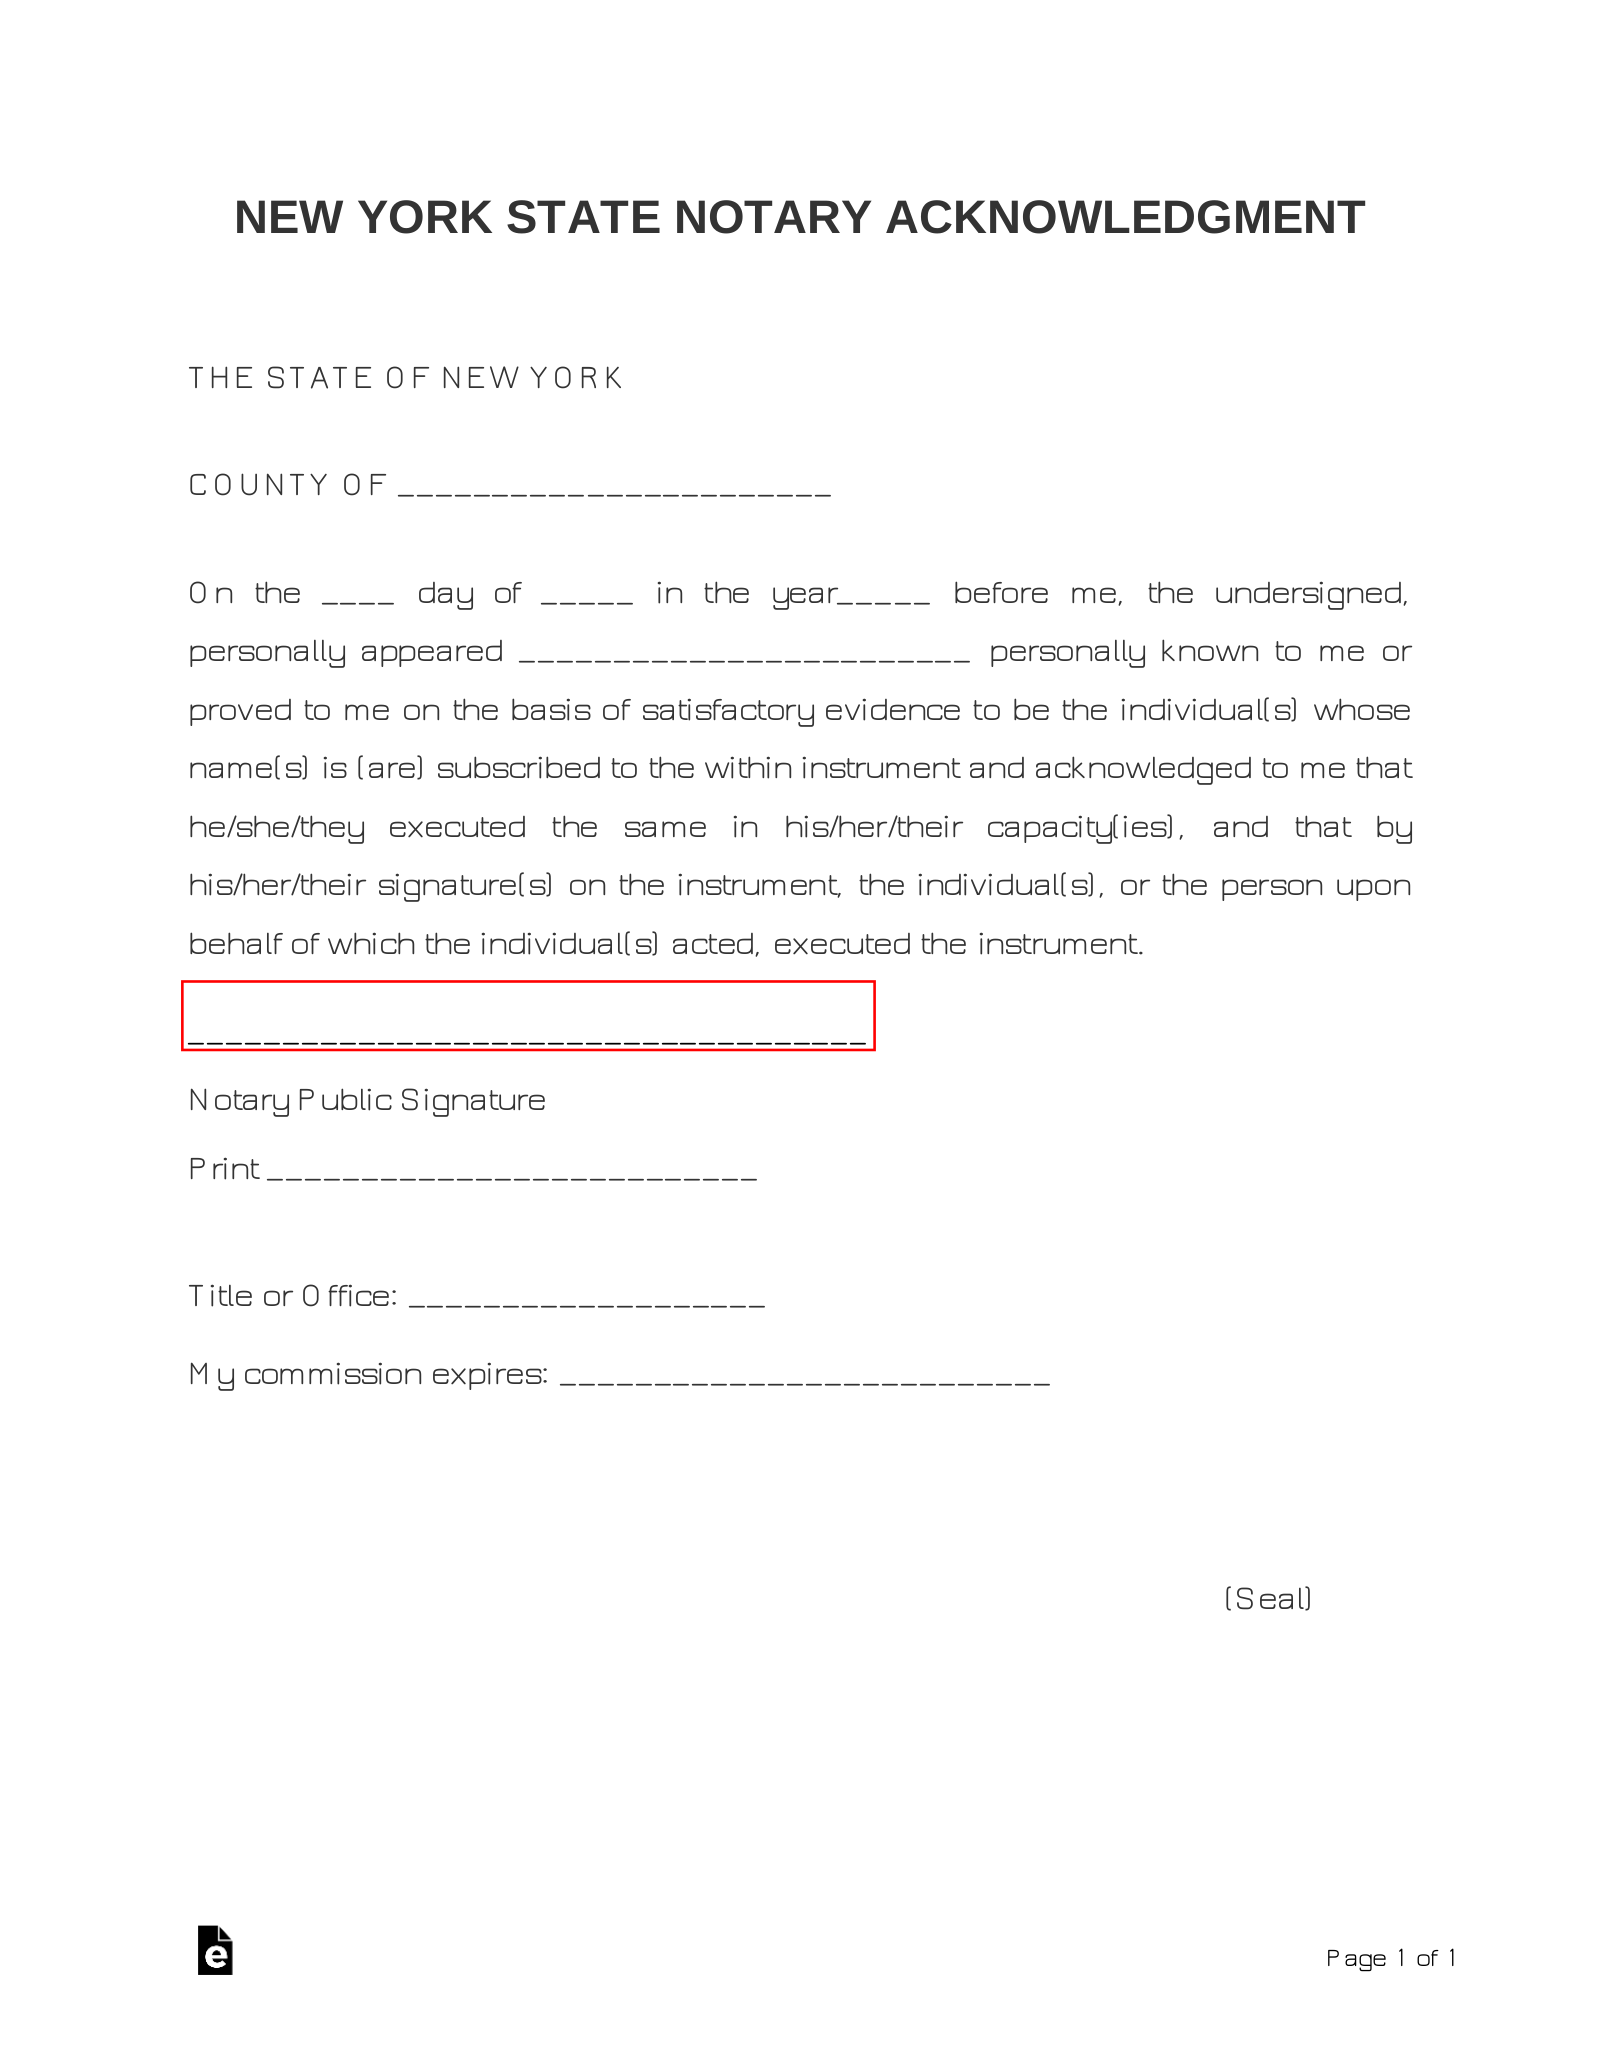 Free New York Notary Acknowledgment Form - PDF | Word | eForms